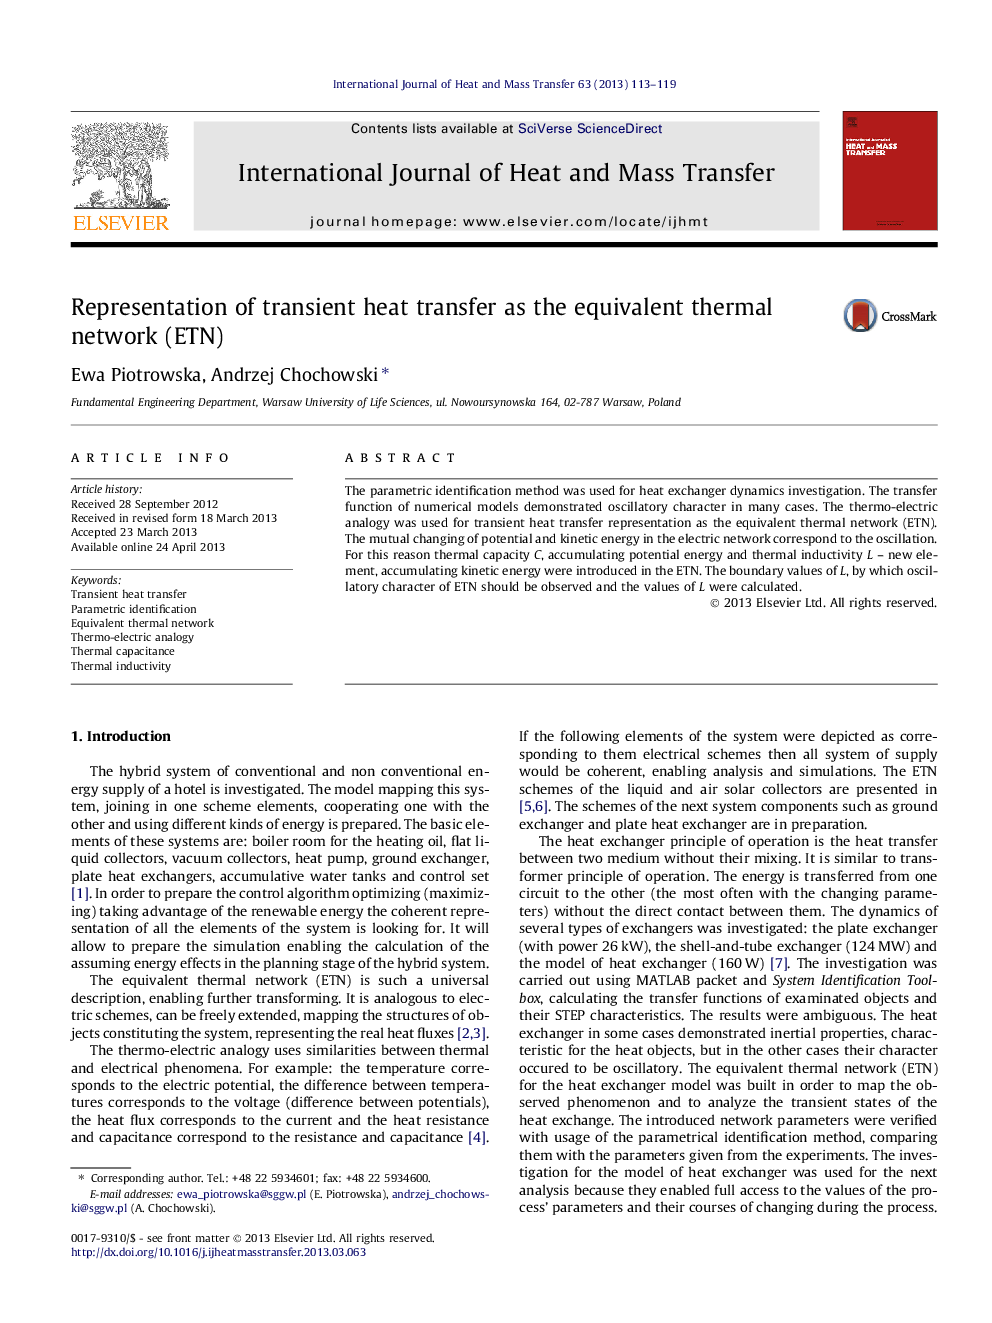 Representation of transient heat transfer as the equivalent thermal network (ETN)